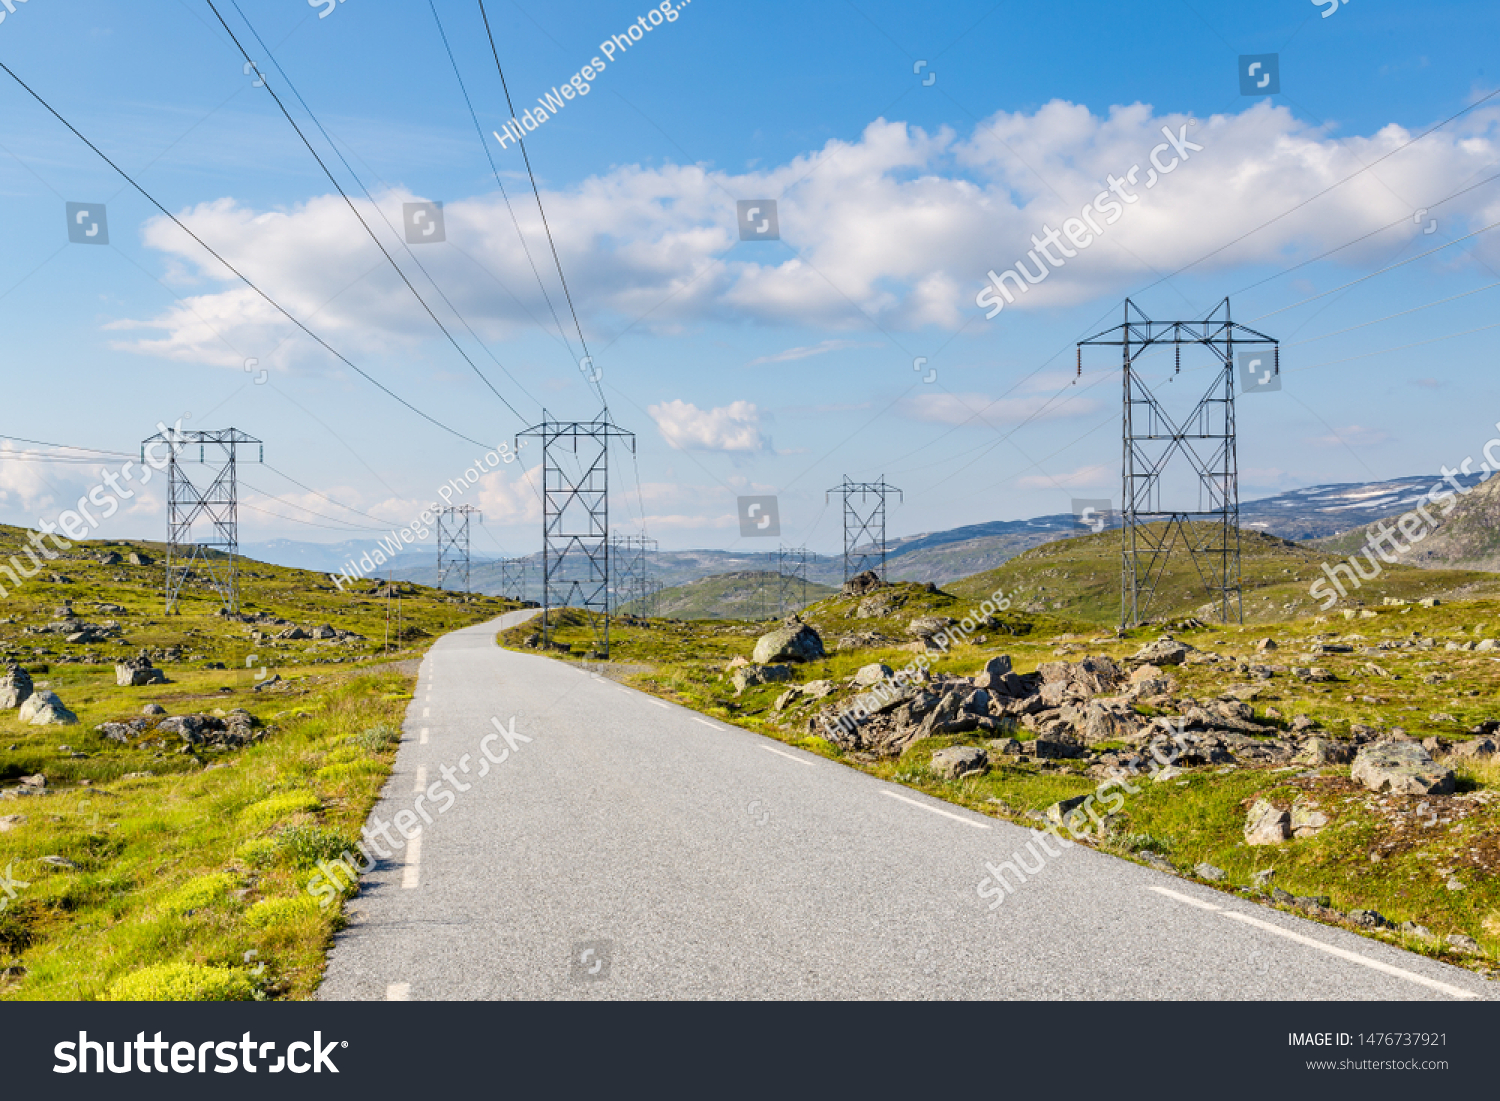 Scenics with electricity transmission pylons along the National Scenic route Aurlandsfjellet between Aurland and Laerdal in Norway. #1476737921